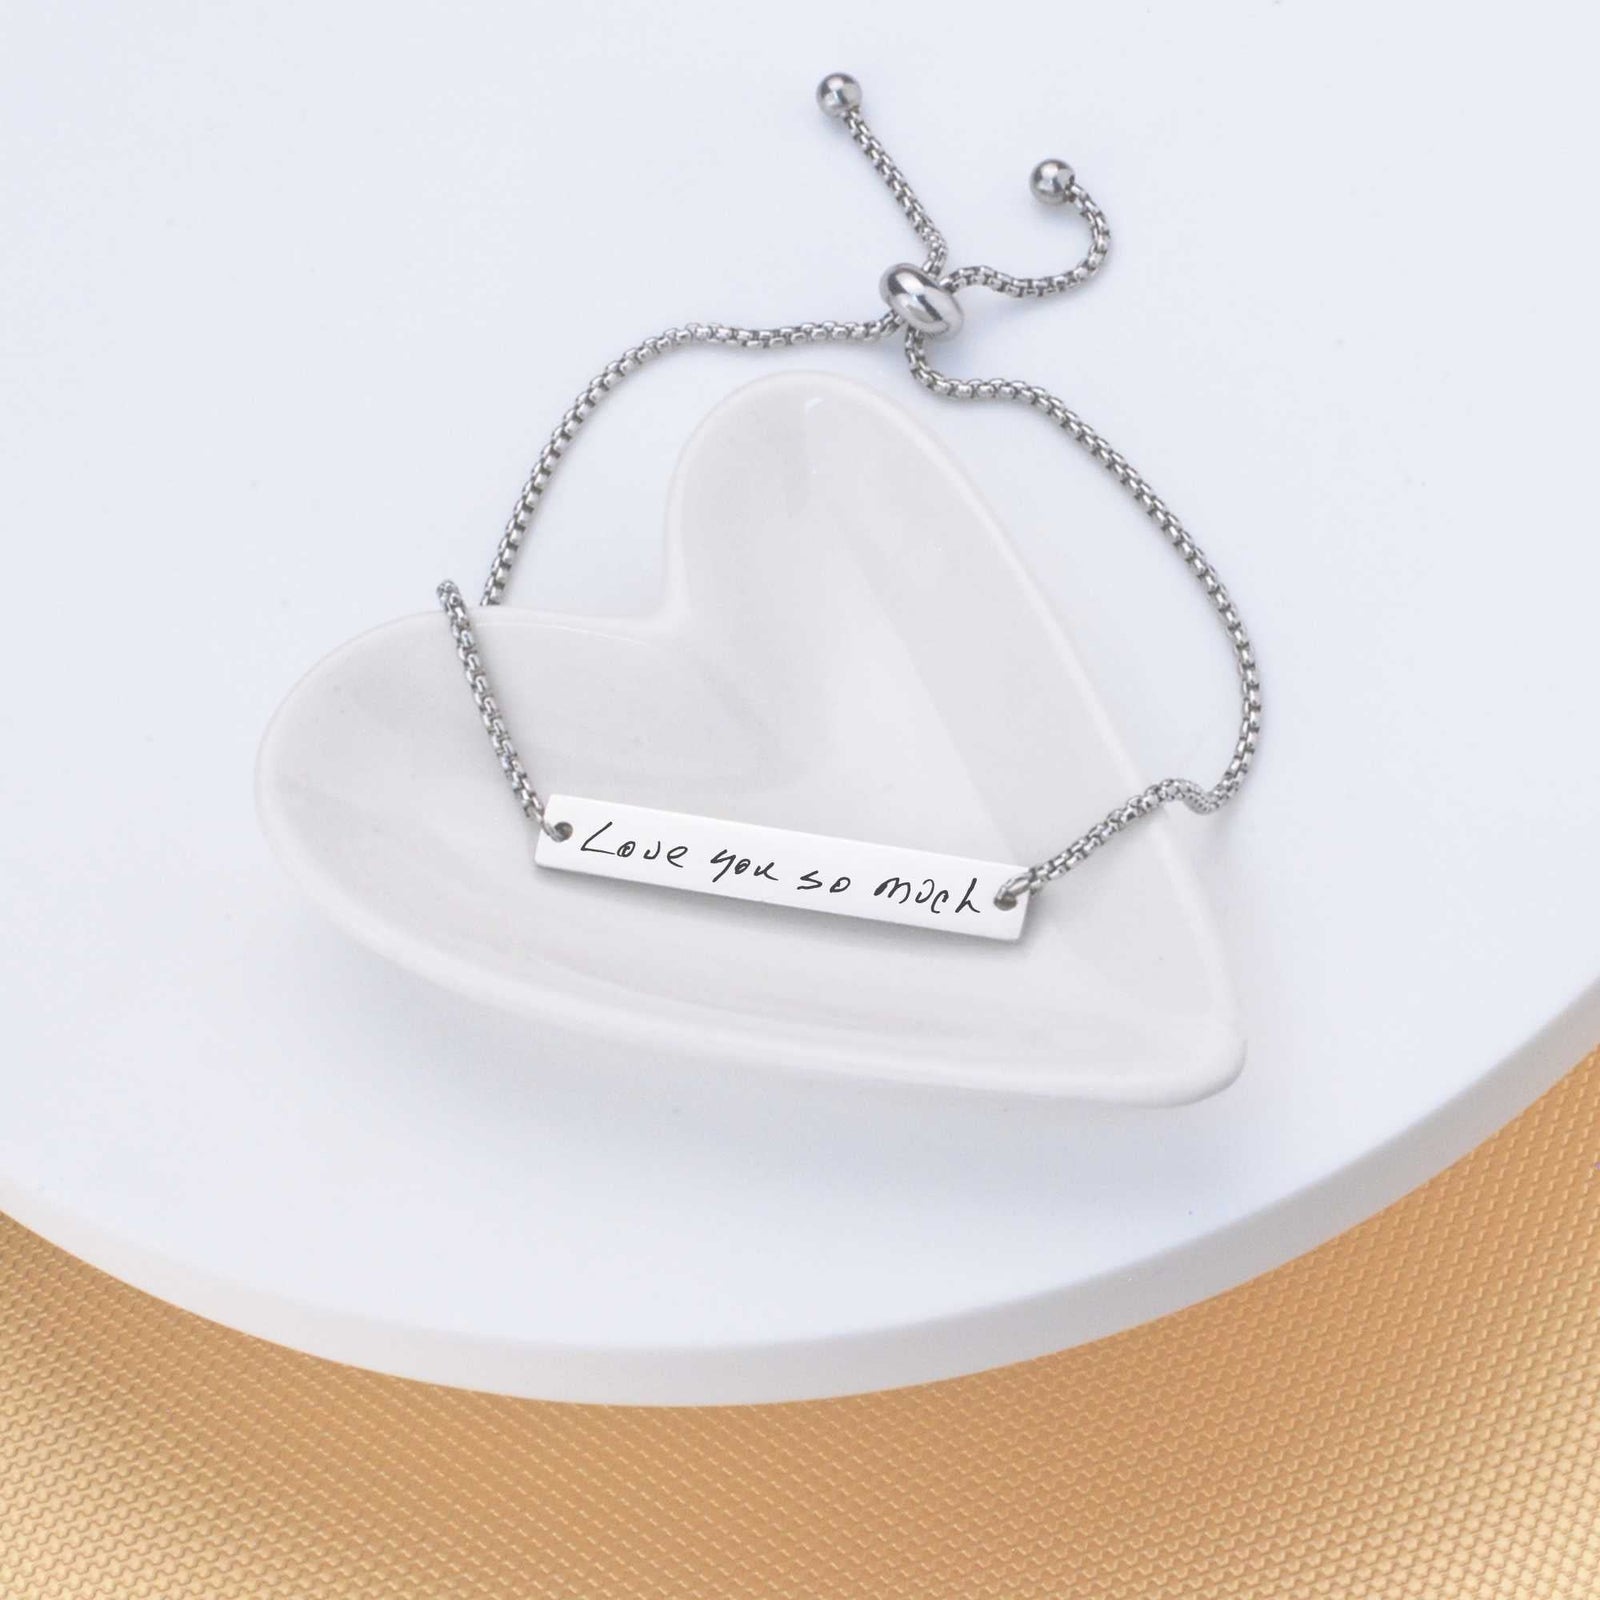 Create Personalized Name Necklace That Will Never Go Out of Style